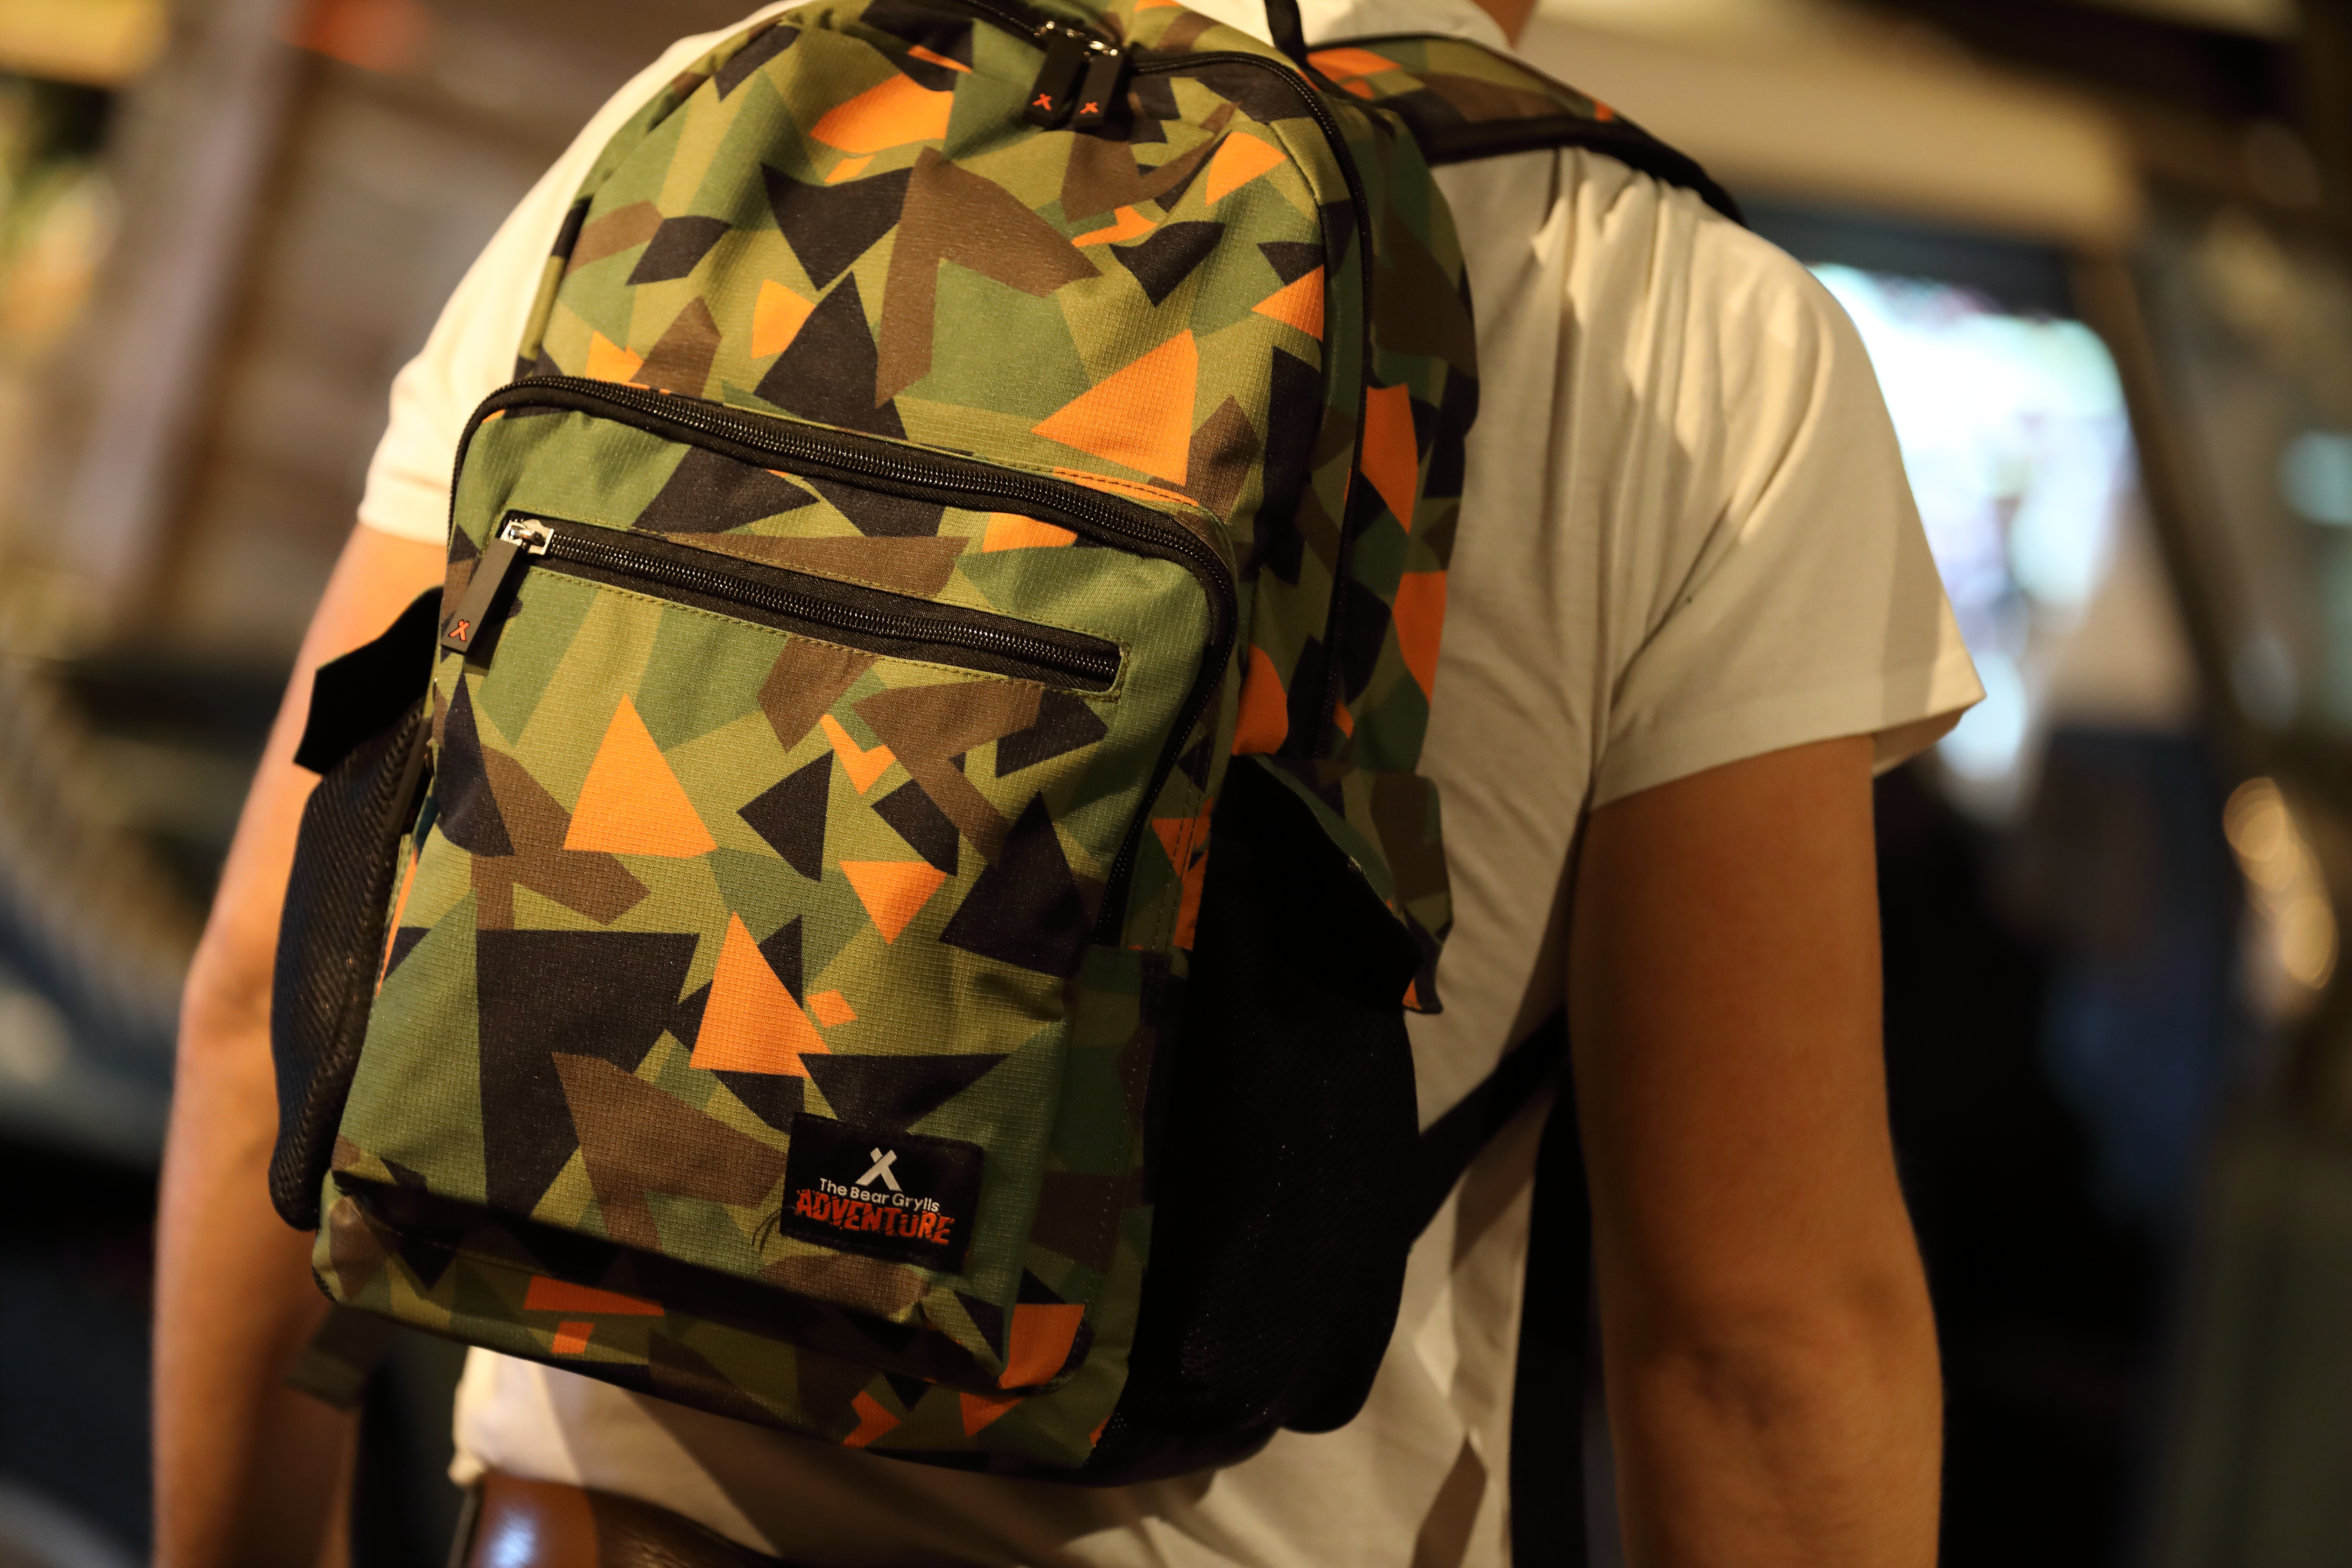 The Bear Grylls Adventure Retail Shop logo camouflage print backpack